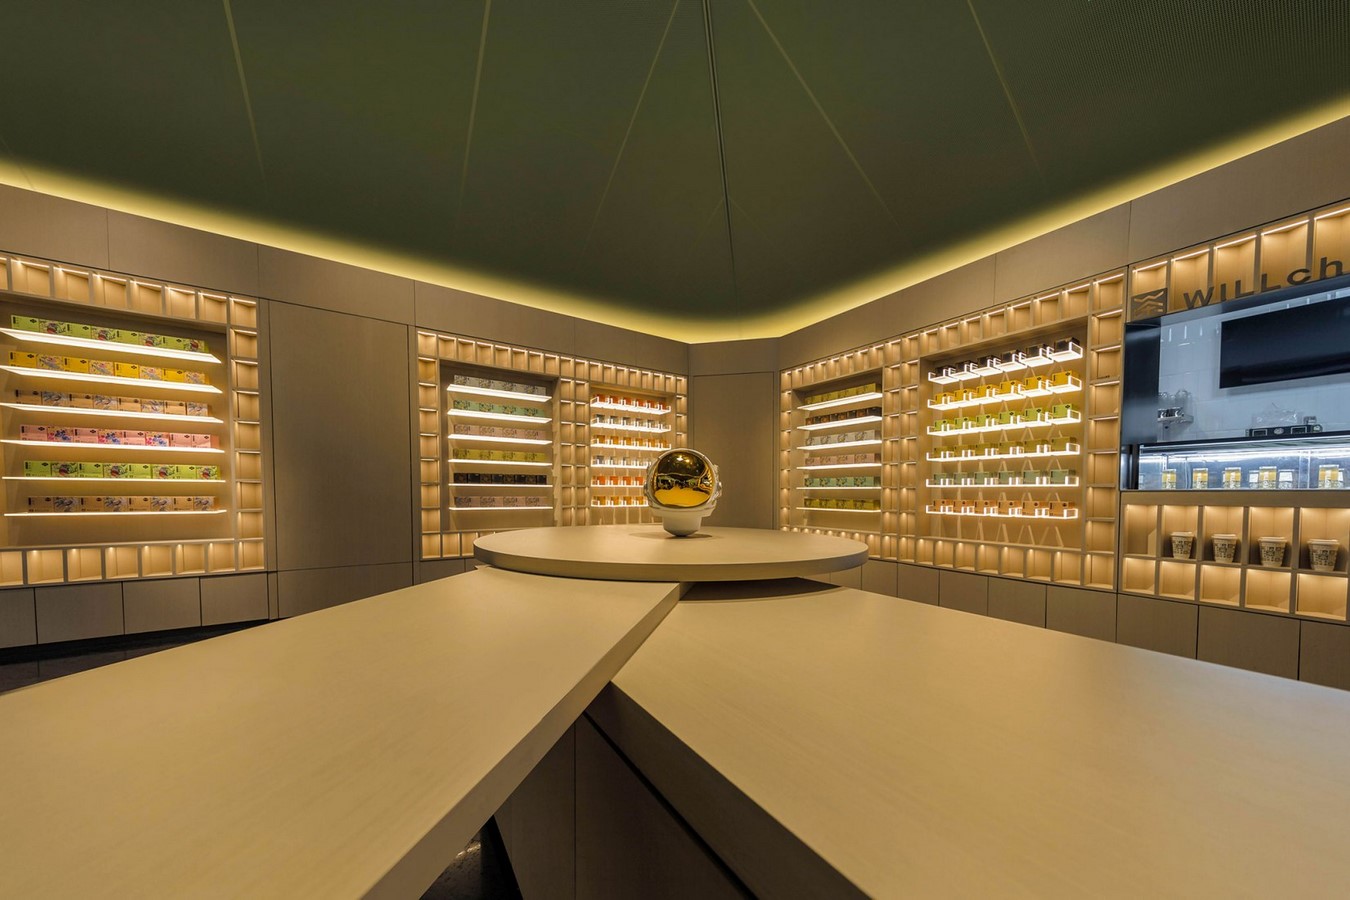 Interiors for Tea Flagship Store like "A Movie Scene" in China designed by CUN Design - Sheet2